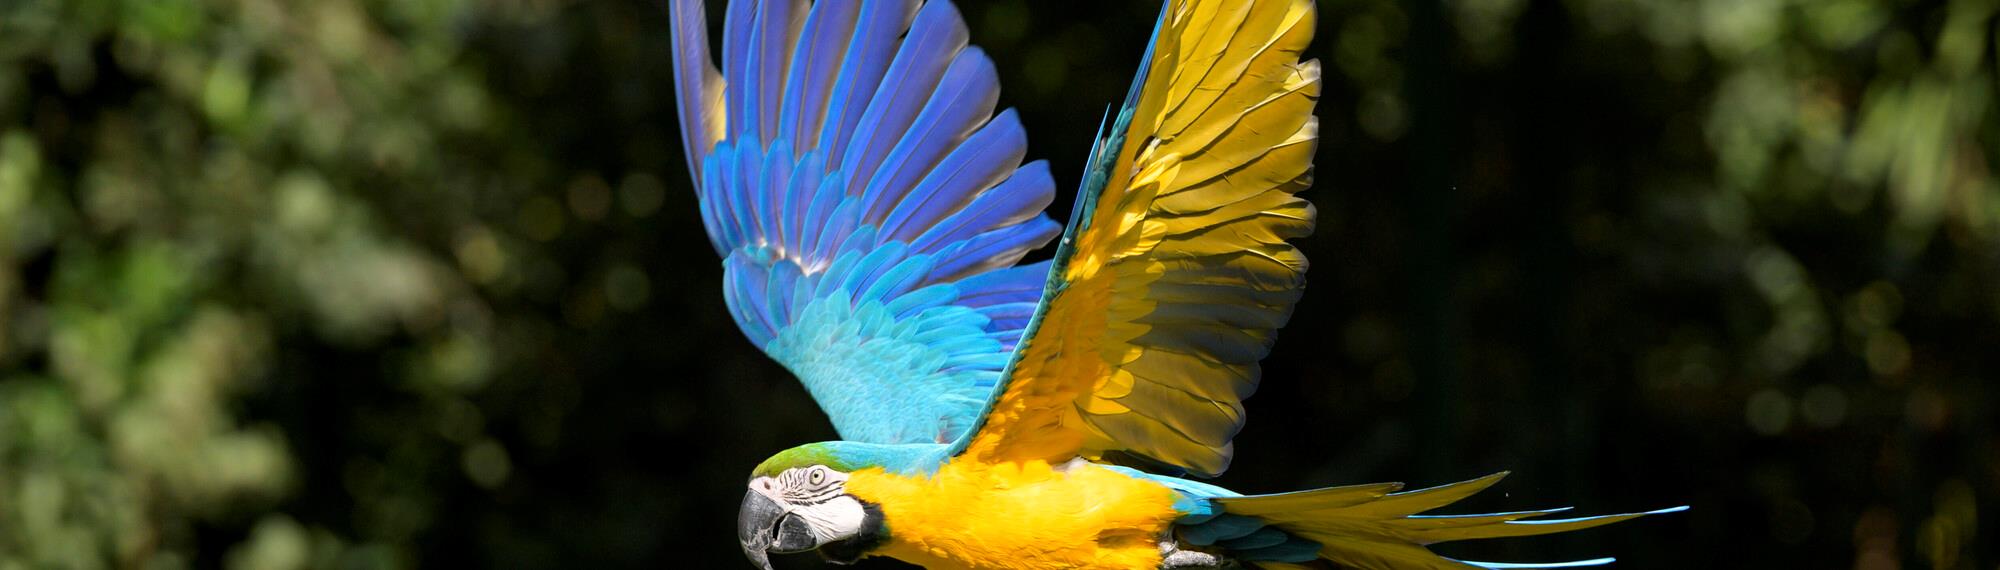 Blue and yellow Macaw parrot flying through the air